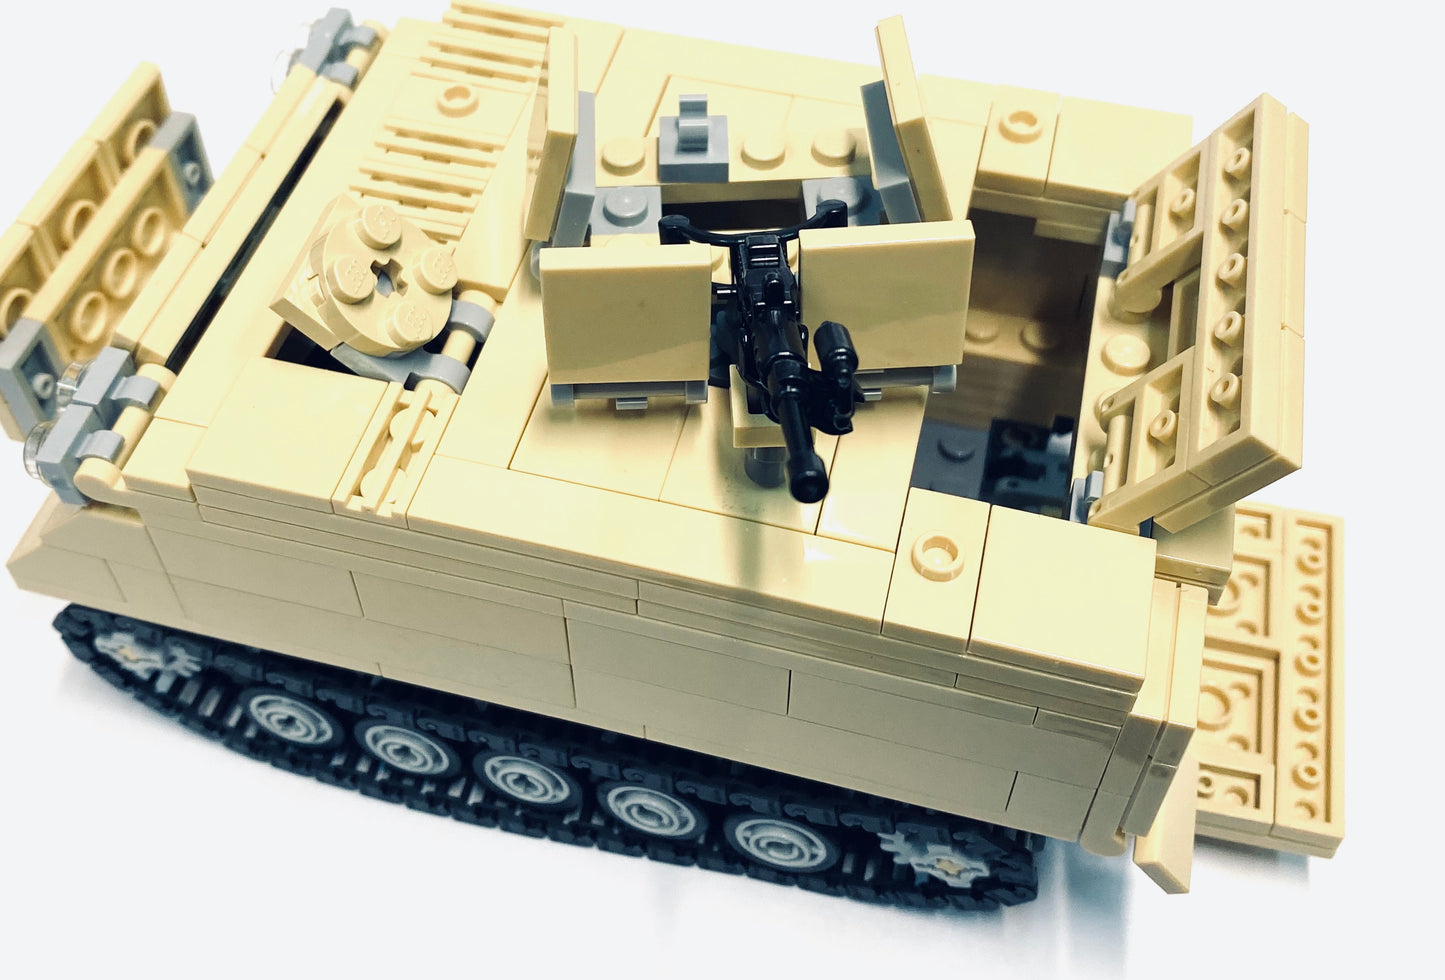 M113 Tan with combat soldiers kit